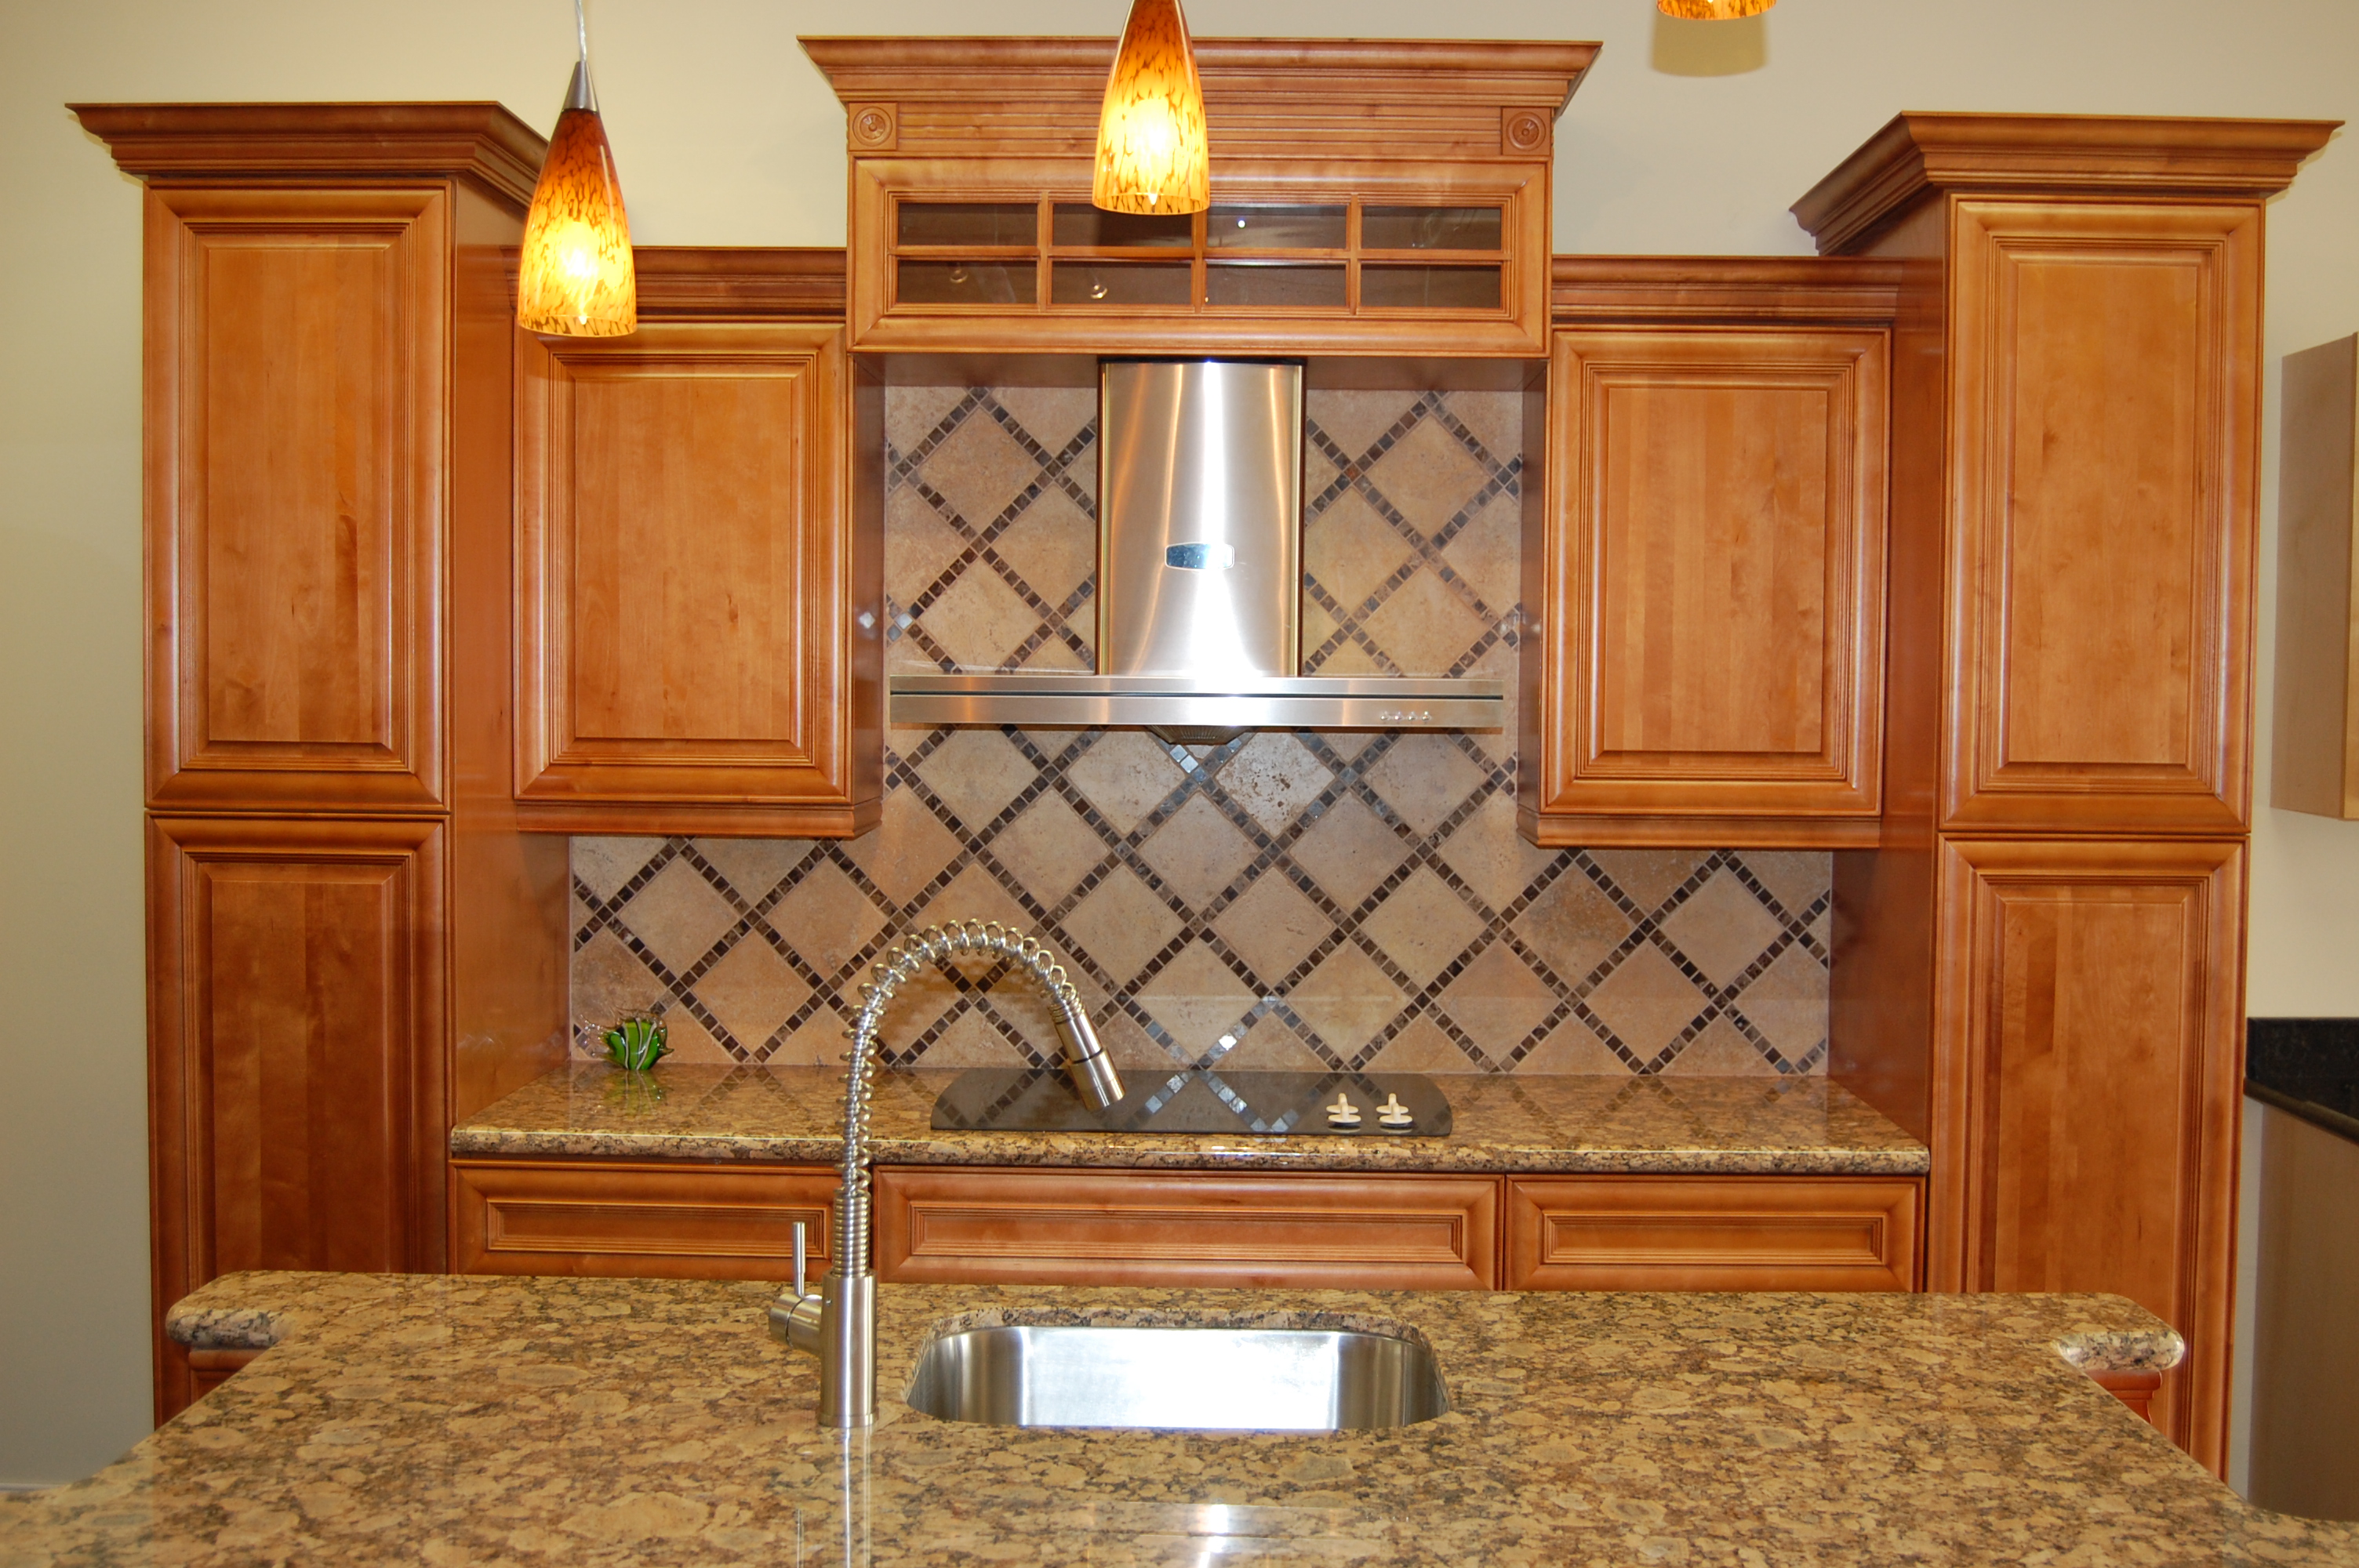 Gallery Kitchen Cabinets And Granite